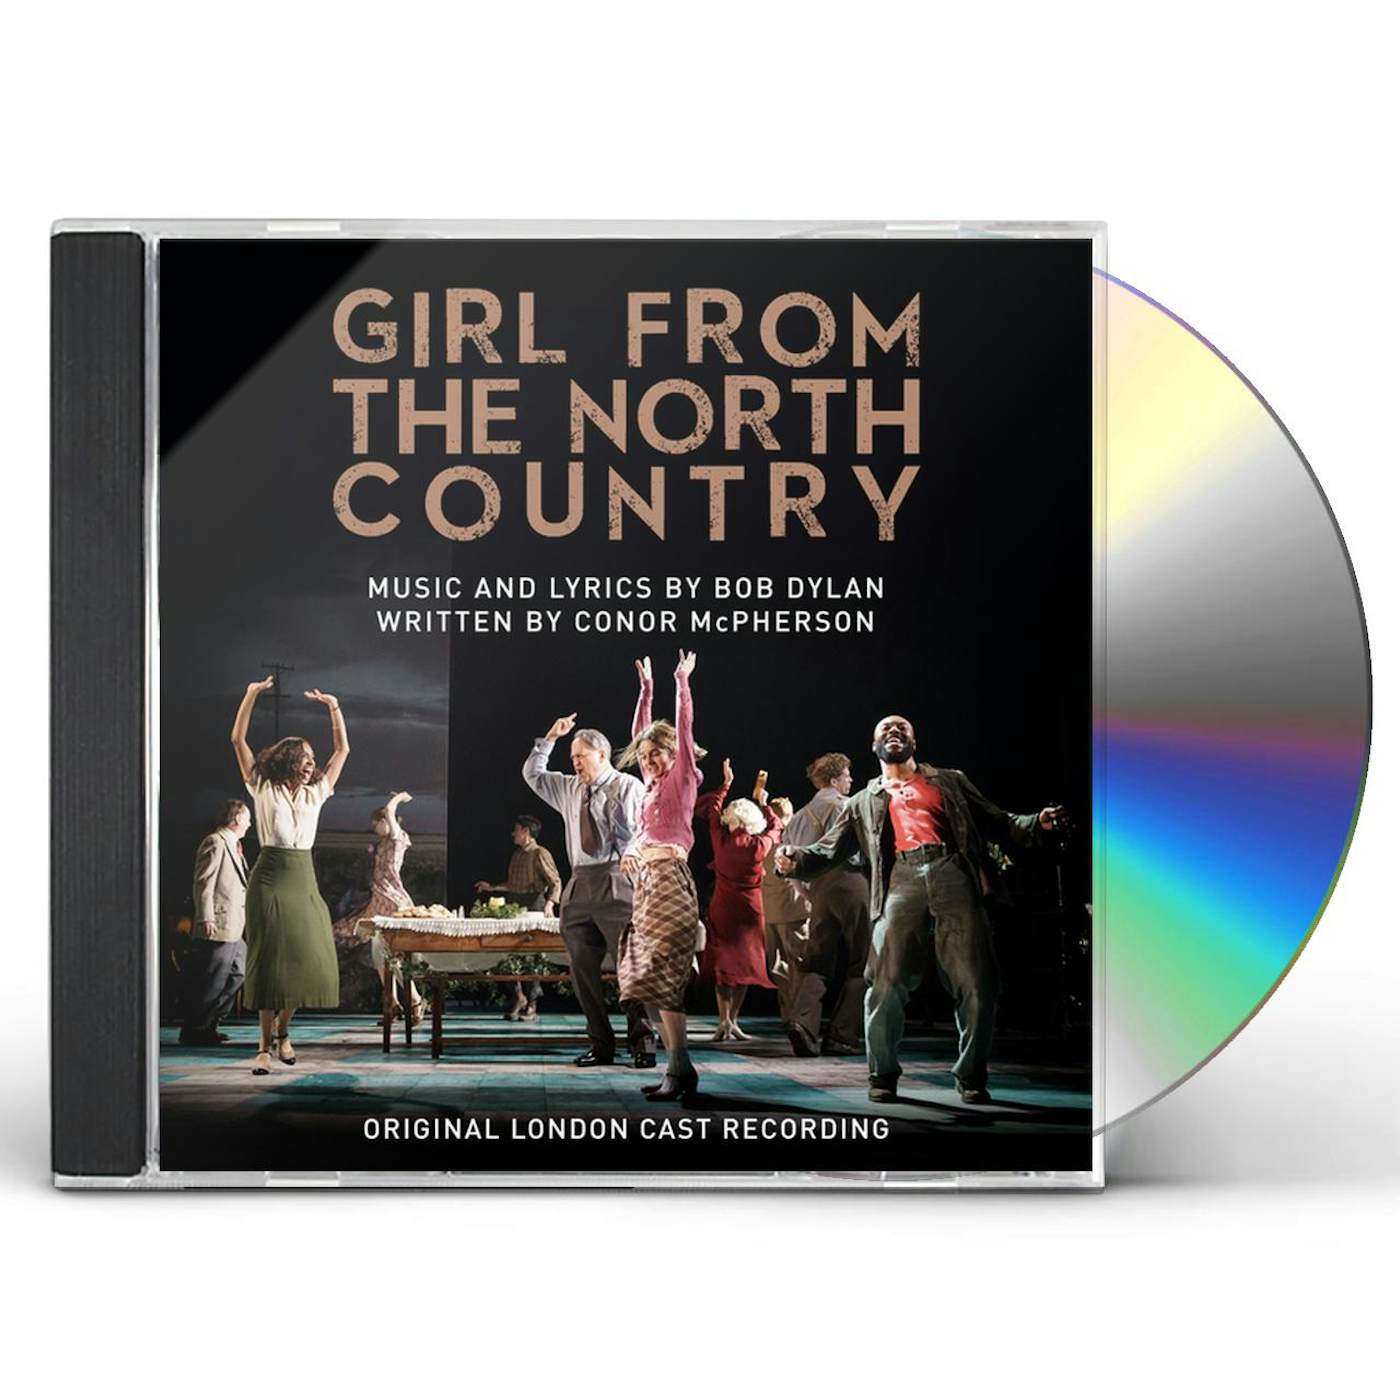 GIRL FROM THE NORTH COUNTRY (ORIGINAL LONDON CAST RECORDING) CD